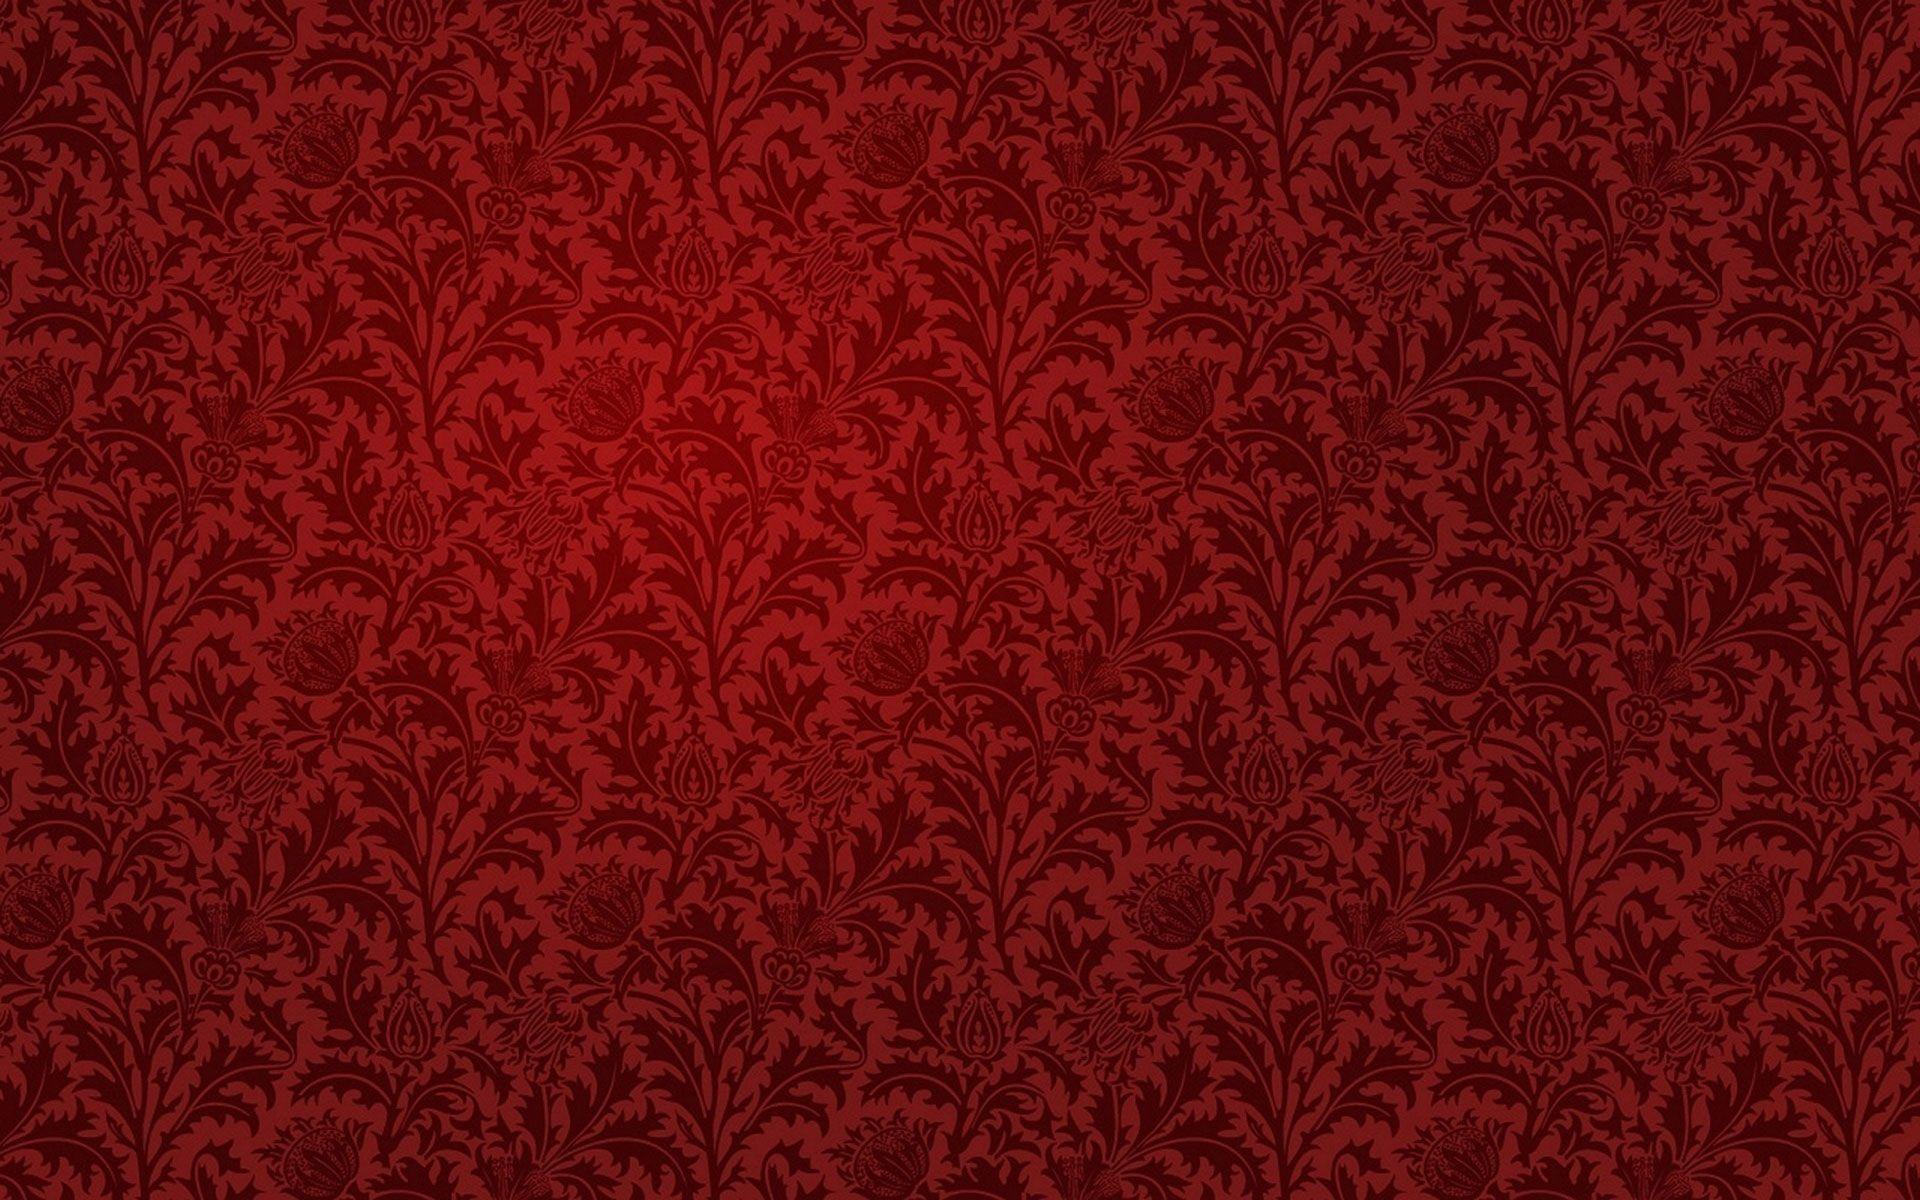 WallMall Golden Peacock Feather on red 3D Wallpapers for Walls Bedroom for  Full Wall Covering 53cmx1000cm 57 sqft red Golden not selfAdhesive  Paper roll  Amazonin Home Improvement